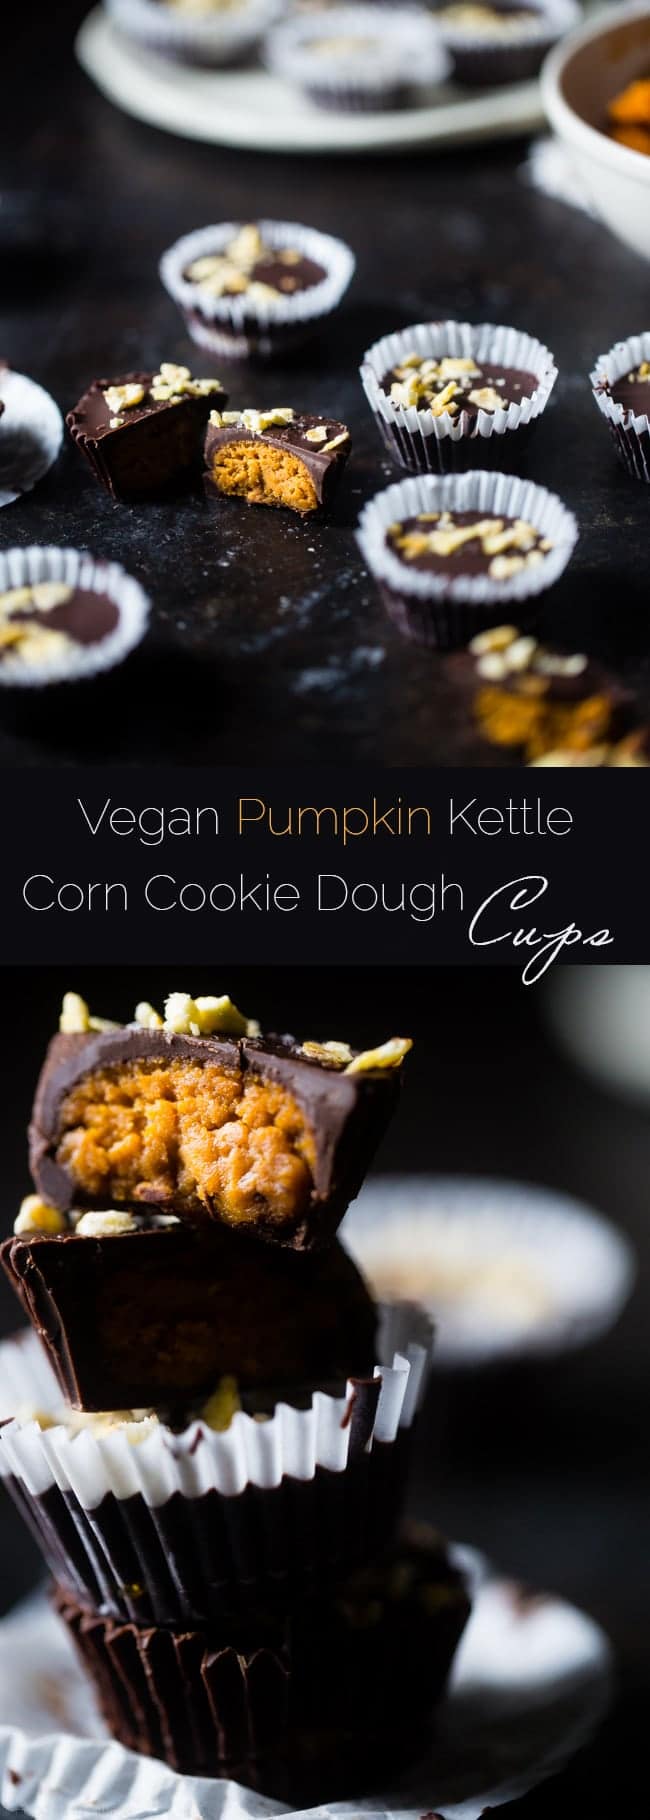 Vegan Pumpkin Kettle Corn Cookie Dough Cups - Stuffed with gluten free pumpkin edible cookie dough and topped with salty-sweet kettle corn! They're a quick and easy dessert that are only 95 calories and 3 SmartPoints! | Foodfaithfitness.com | @FoodFaithFit